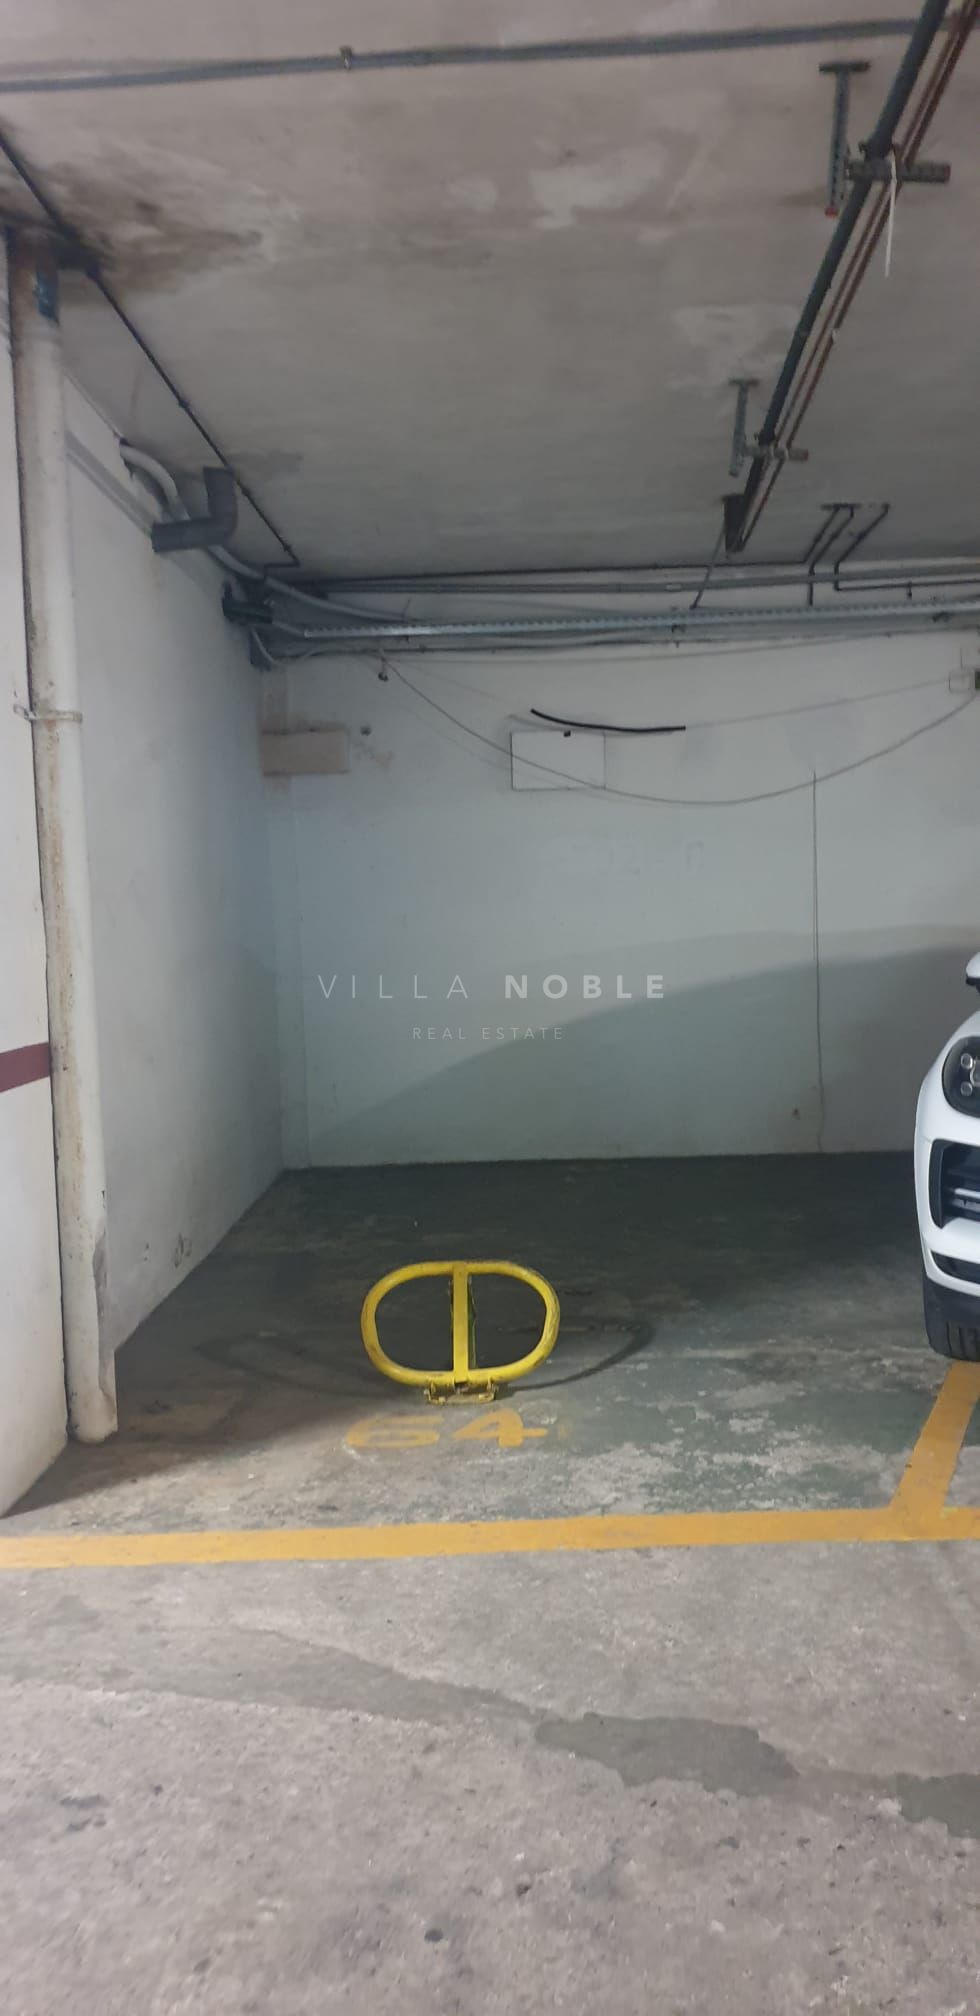 Garage space in a Underground Garage at Puerta Banus available for Sale